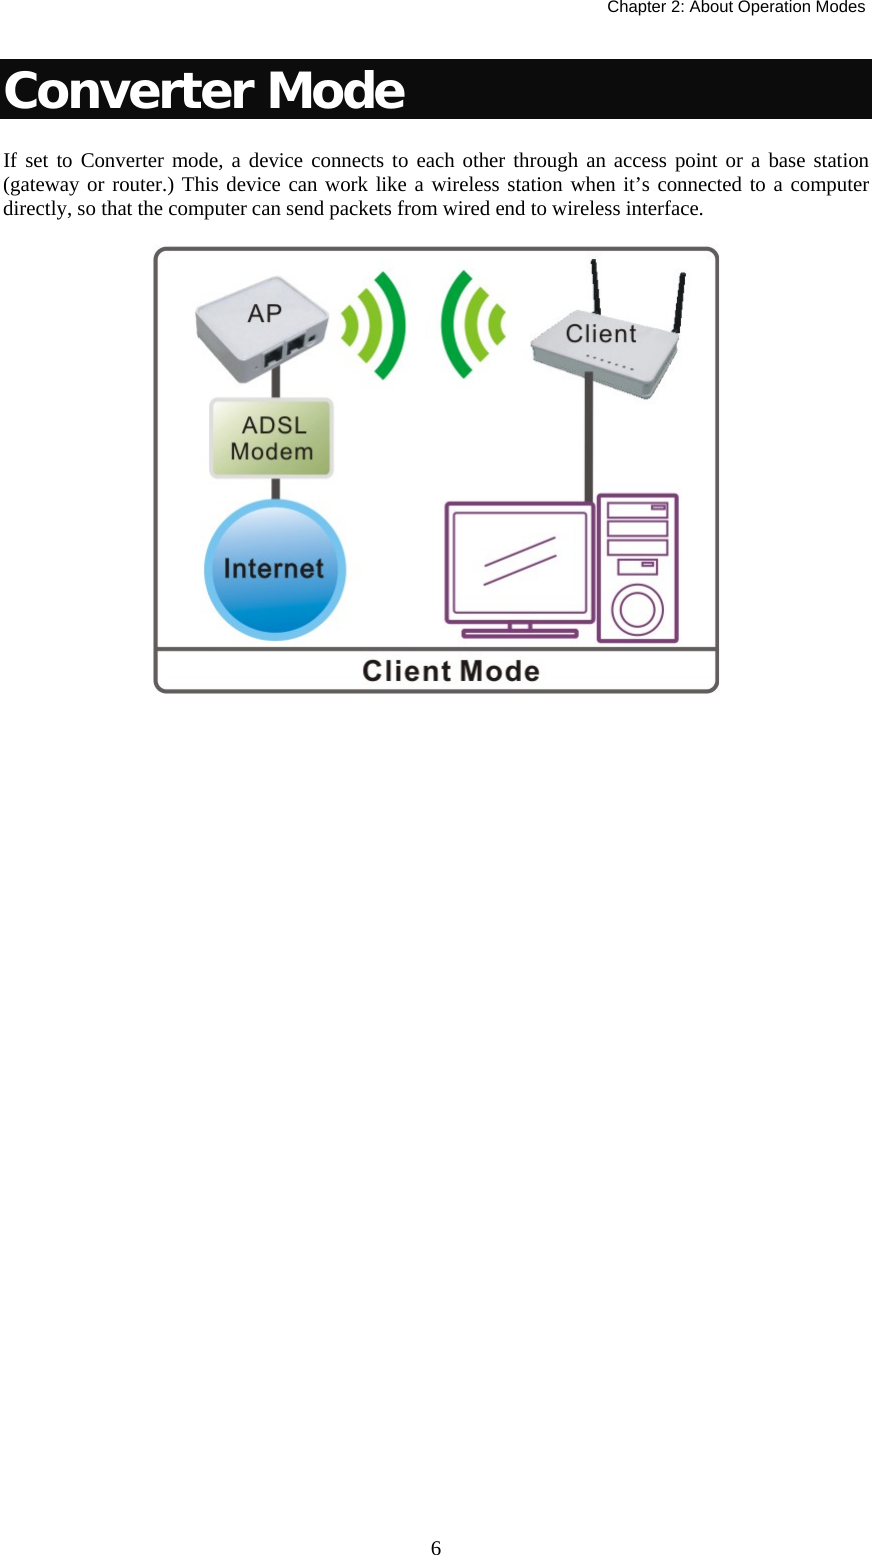   Chapter 2: About Operation Modes  6Converter Mode If set to Converter mode, a device connects to each other through an access point or a base station (gateway or router.) This device can work like a wireless station when it’s connected to a computer directly, so that the computer can send packets from wired end to wireless interface.      